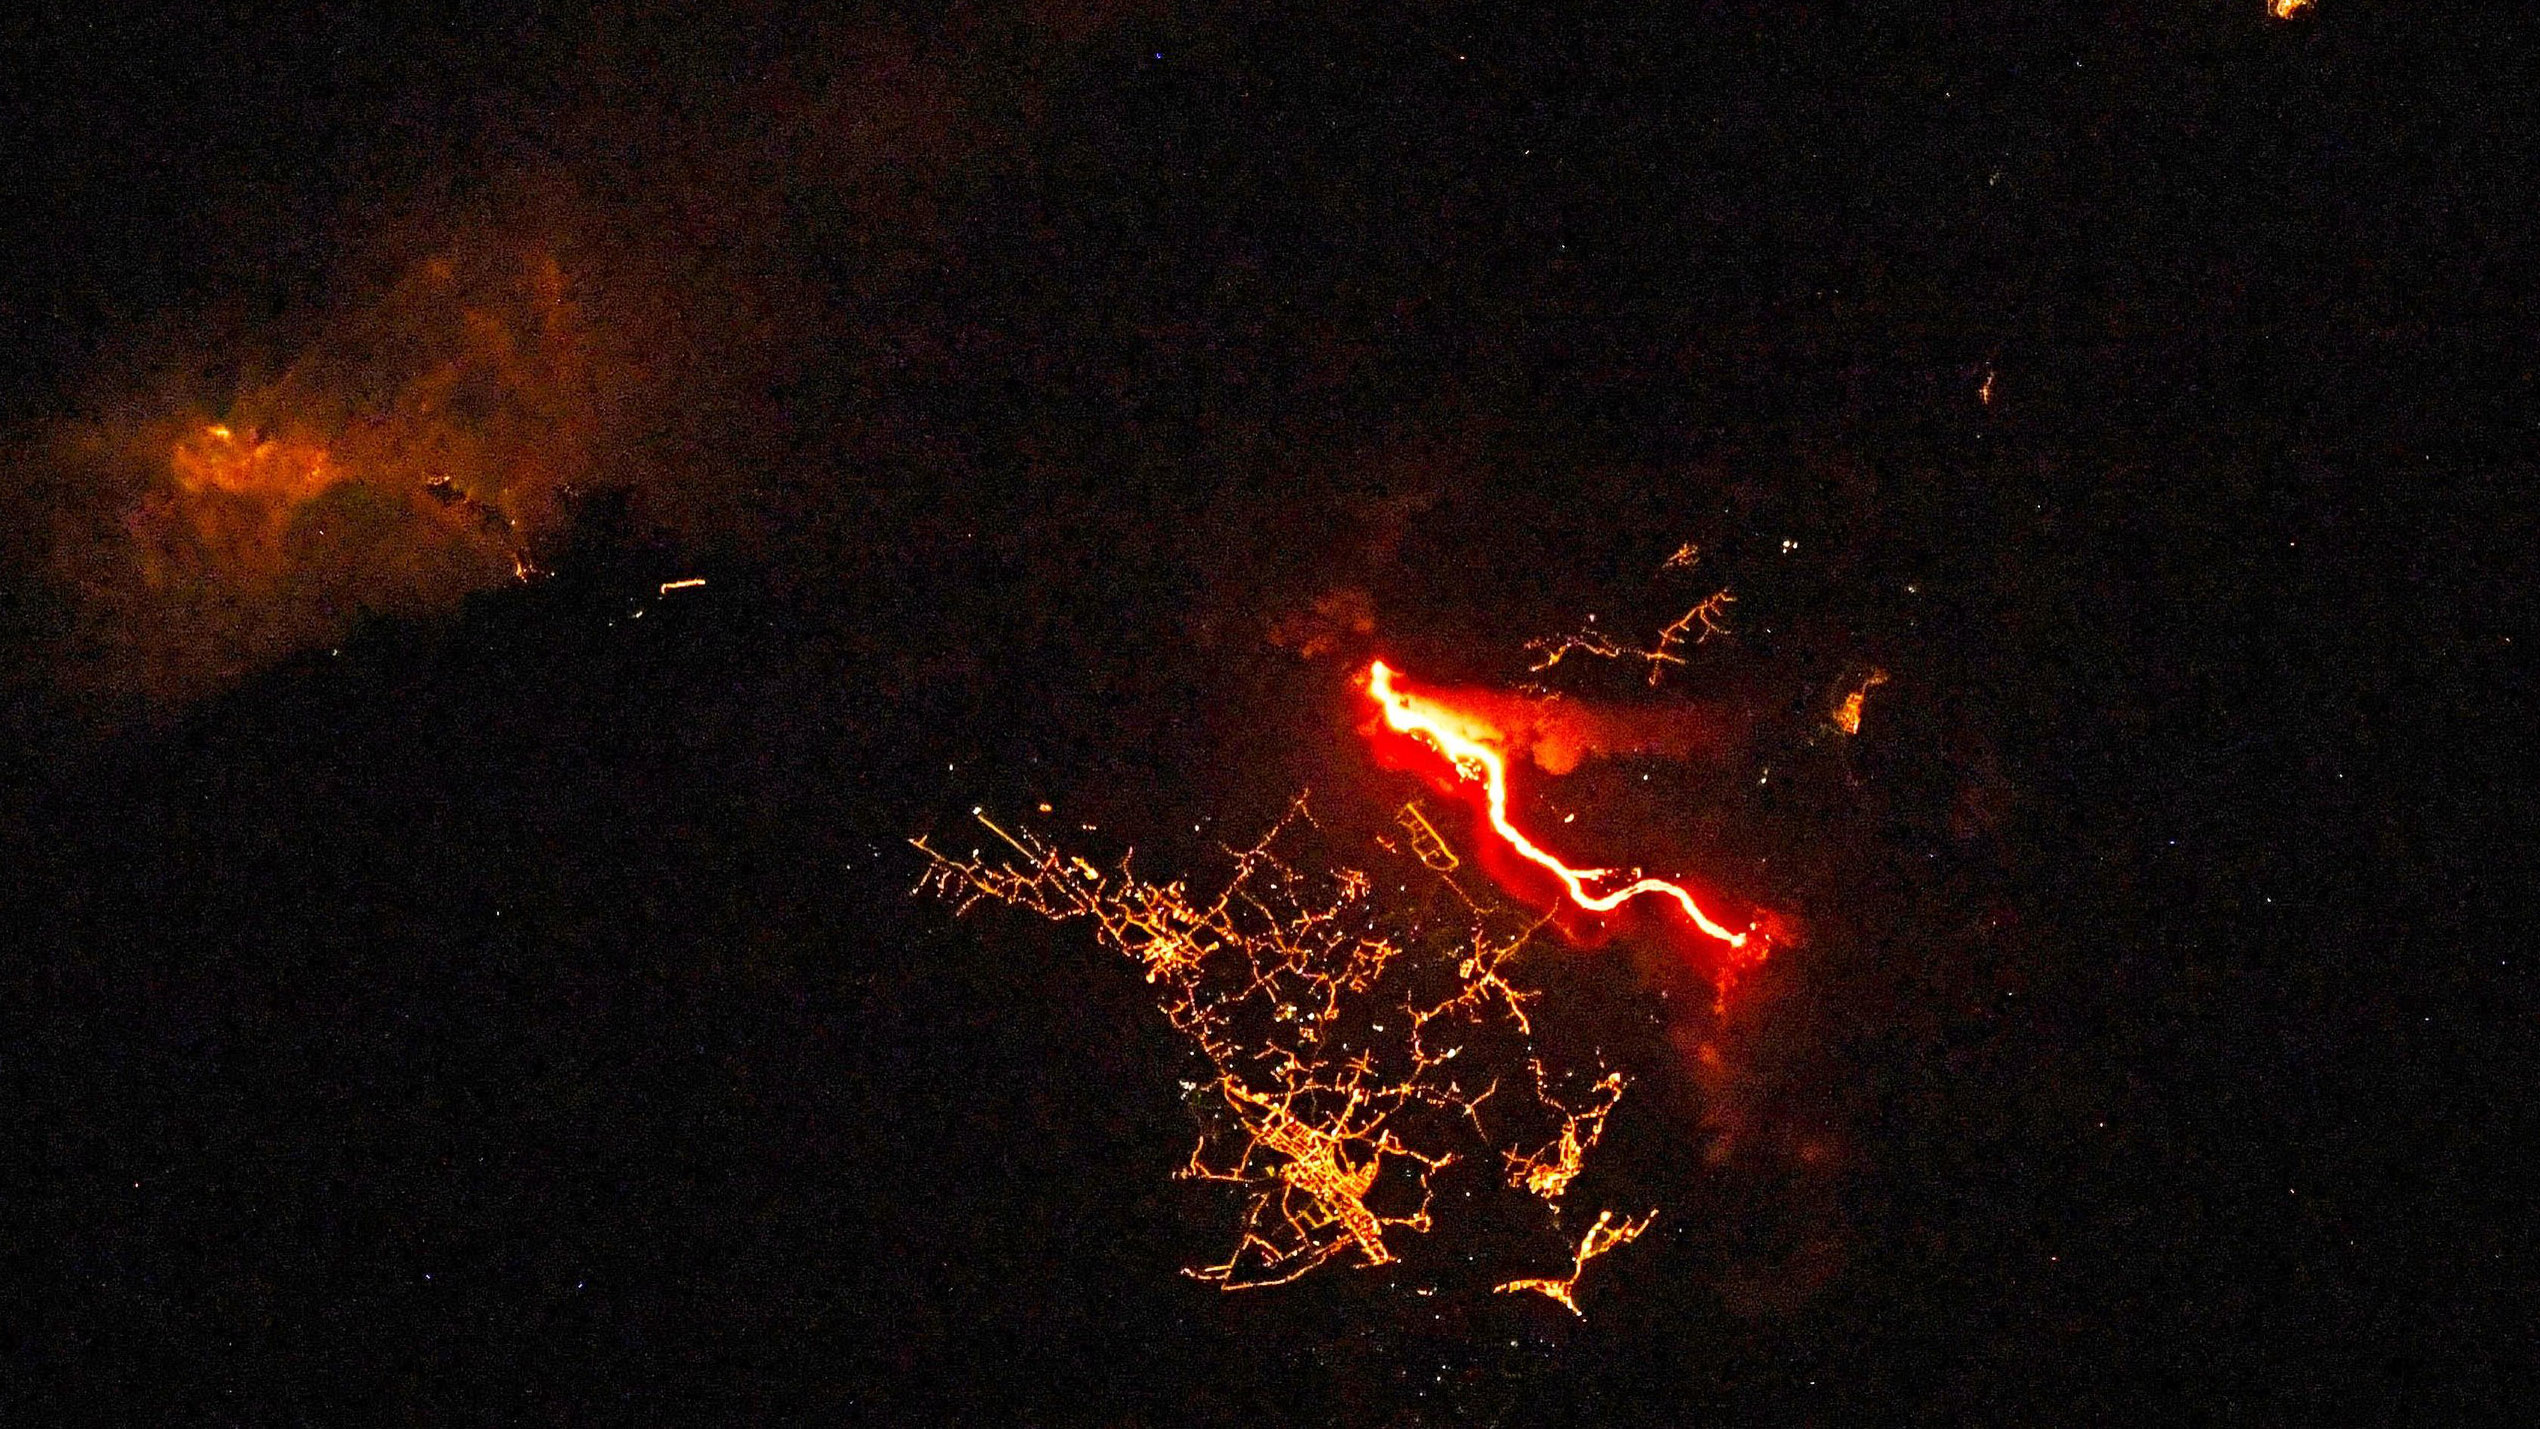 Unstoppable lava from La Palma volcano eruption reaches ocean in stunning space photos thumbnail